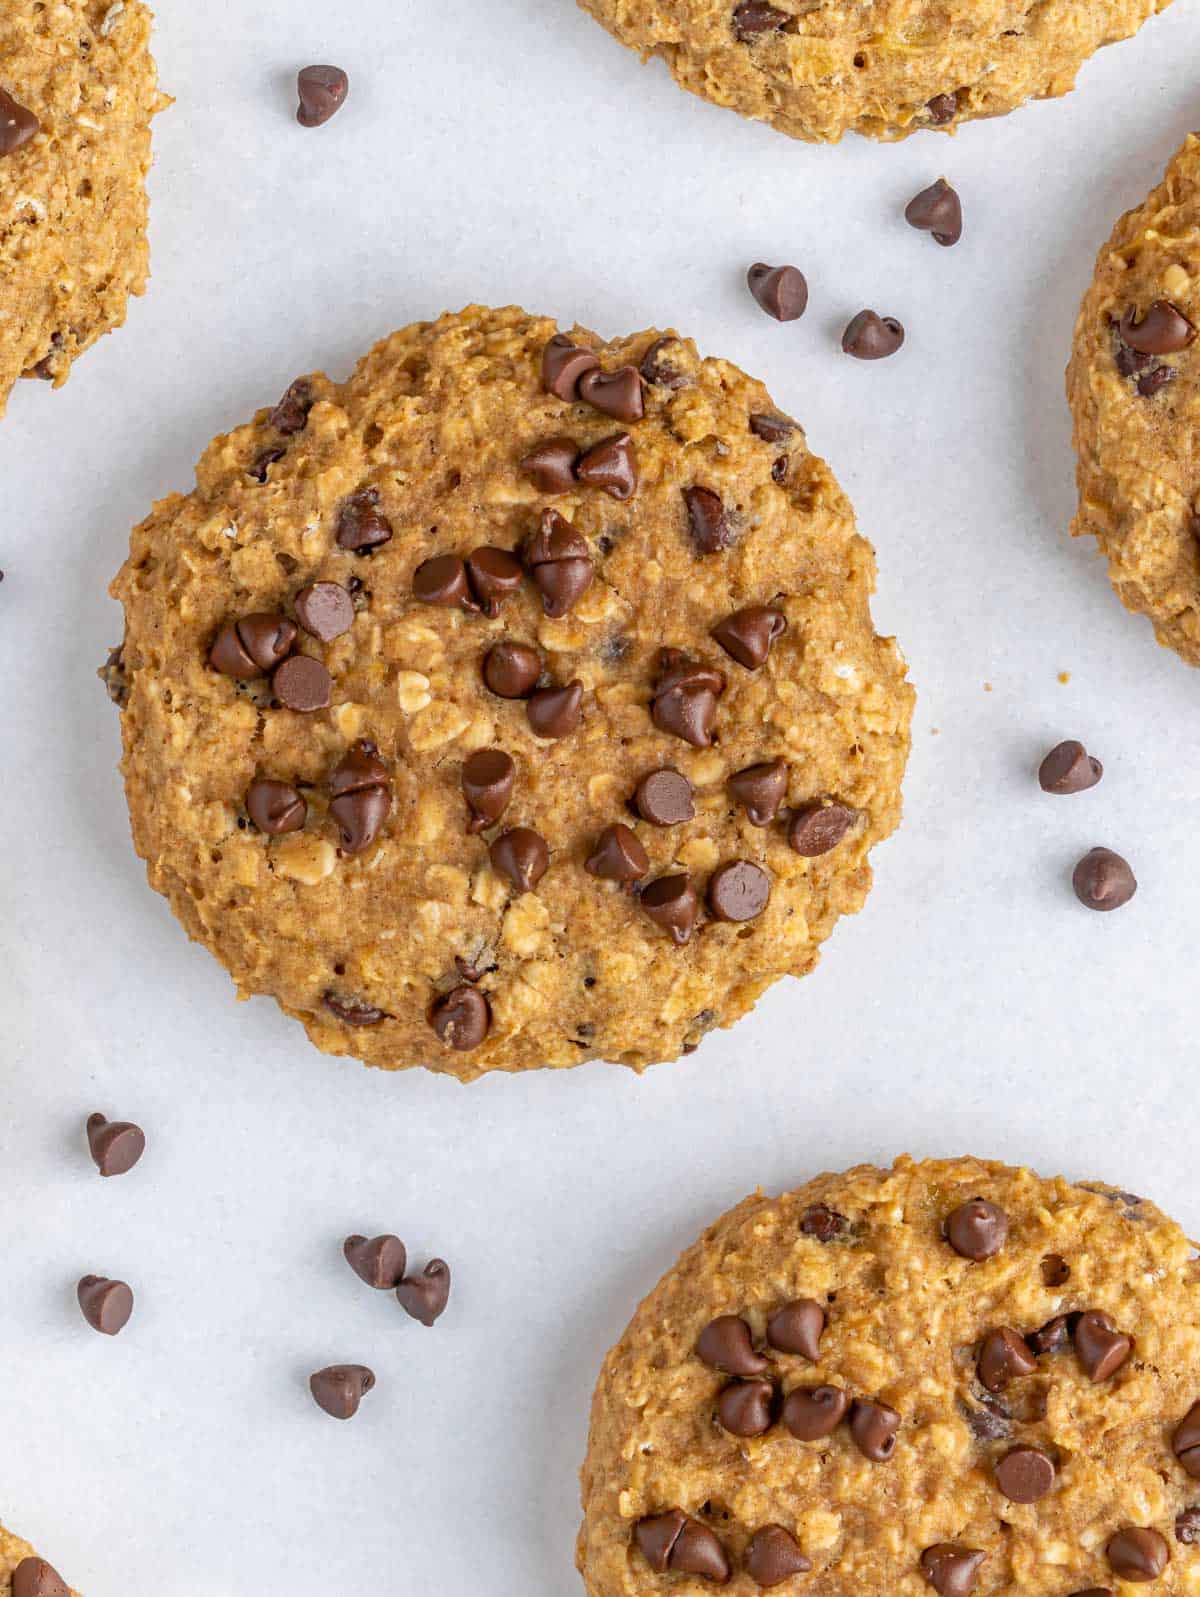 Overhead view of a healthy chocolate chip oatmeal cookie with chocolate chips scattered around.